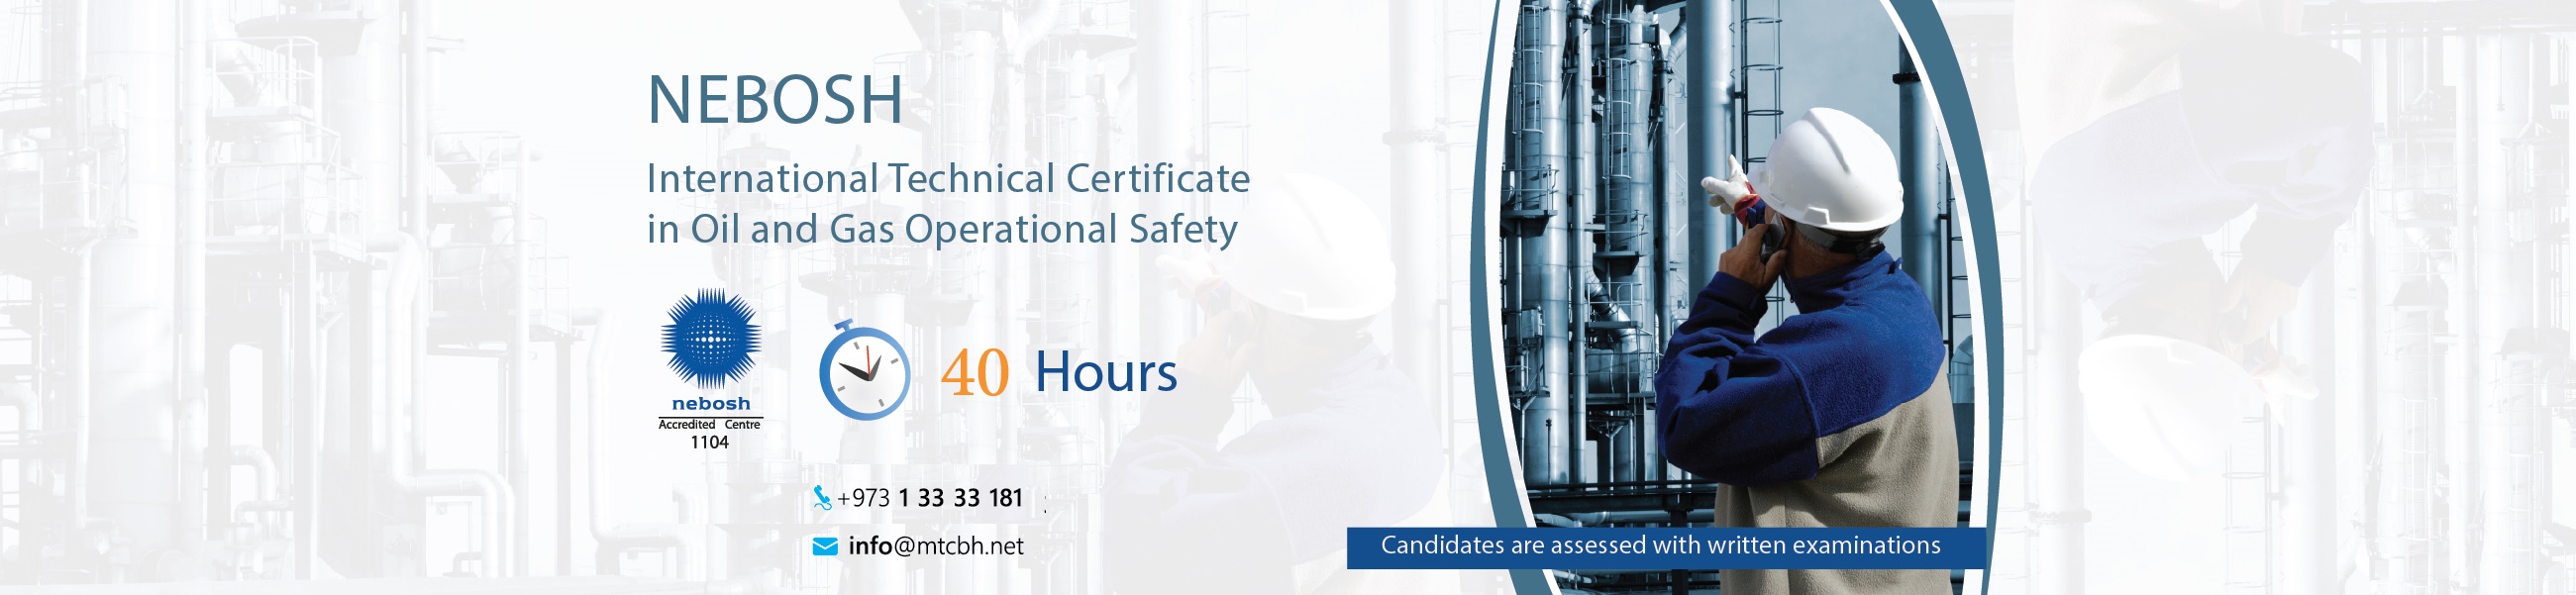 Website -NEBOSH IT Certificate in Oil and Gas Operational Safety-01.jpg